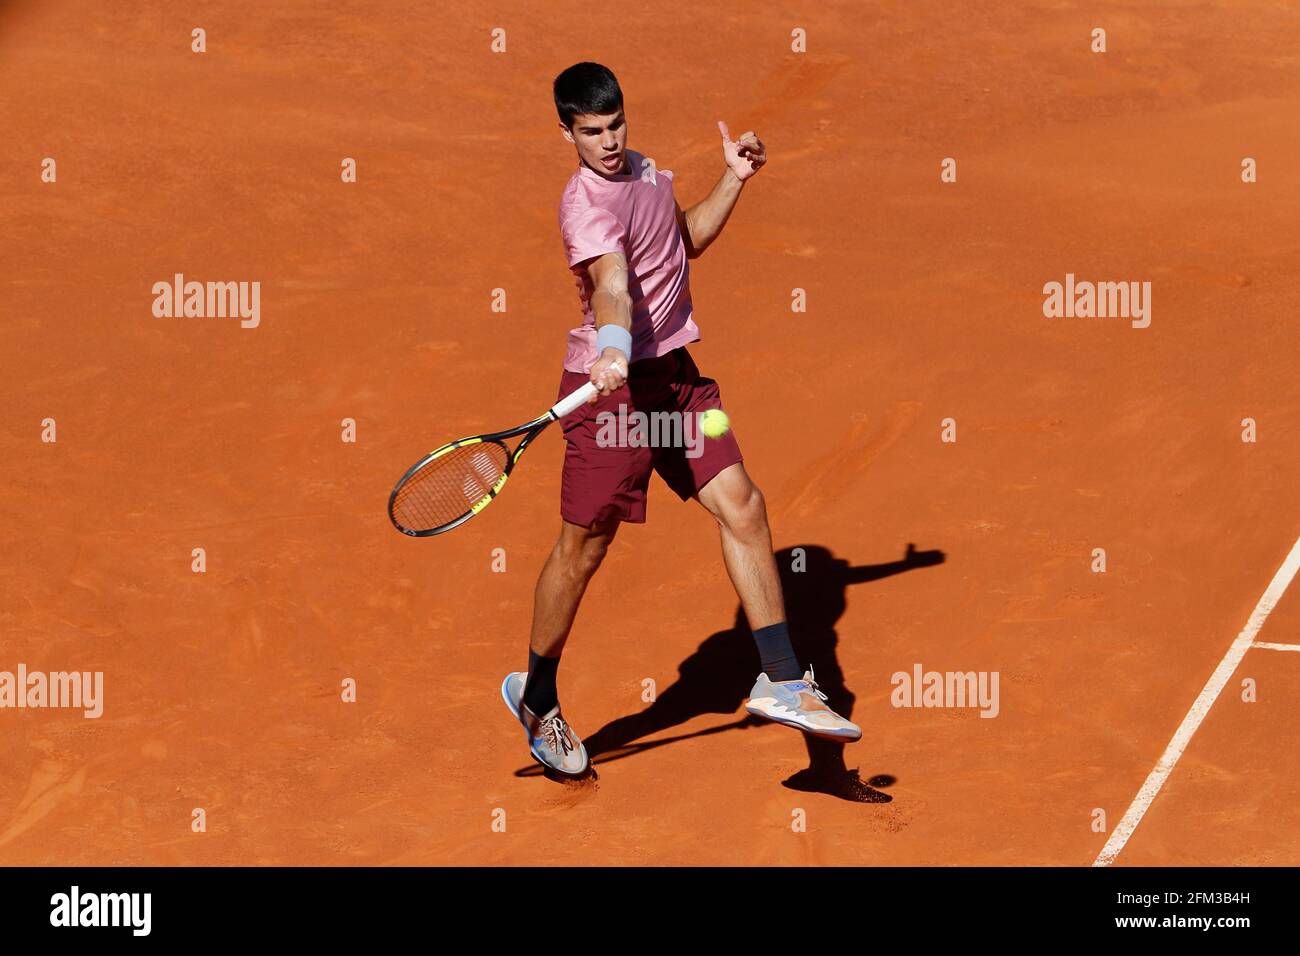 Madrid, Spain. 5th May, 2021. Carlos Alcaraz (ESP) Tennis : Carlos Alcaraz  of Spain during Singles 2nd round match against Rafael Nadal of Spain on  the ATP World Tour Masters 1000 "Mutua